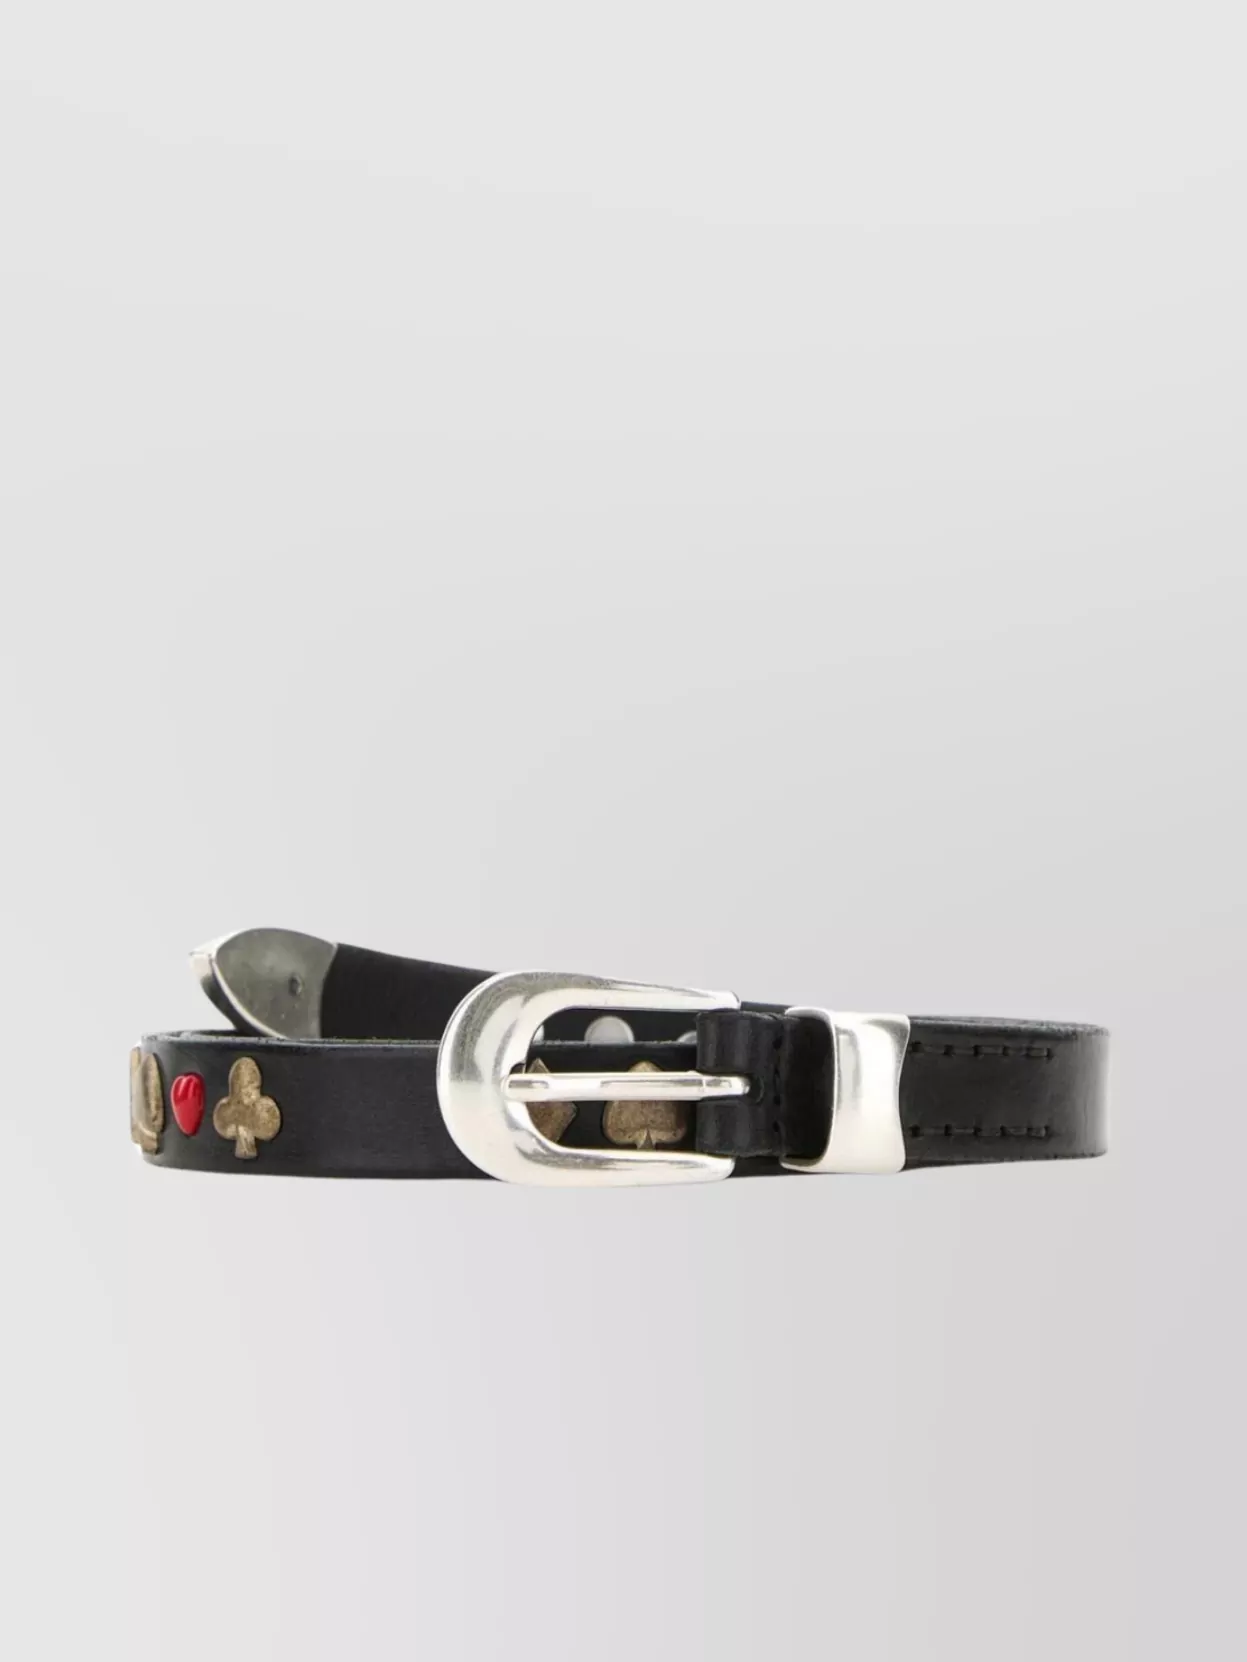 Shop Our Legacy Leather Belt With Adjustable Length And Punched Holes